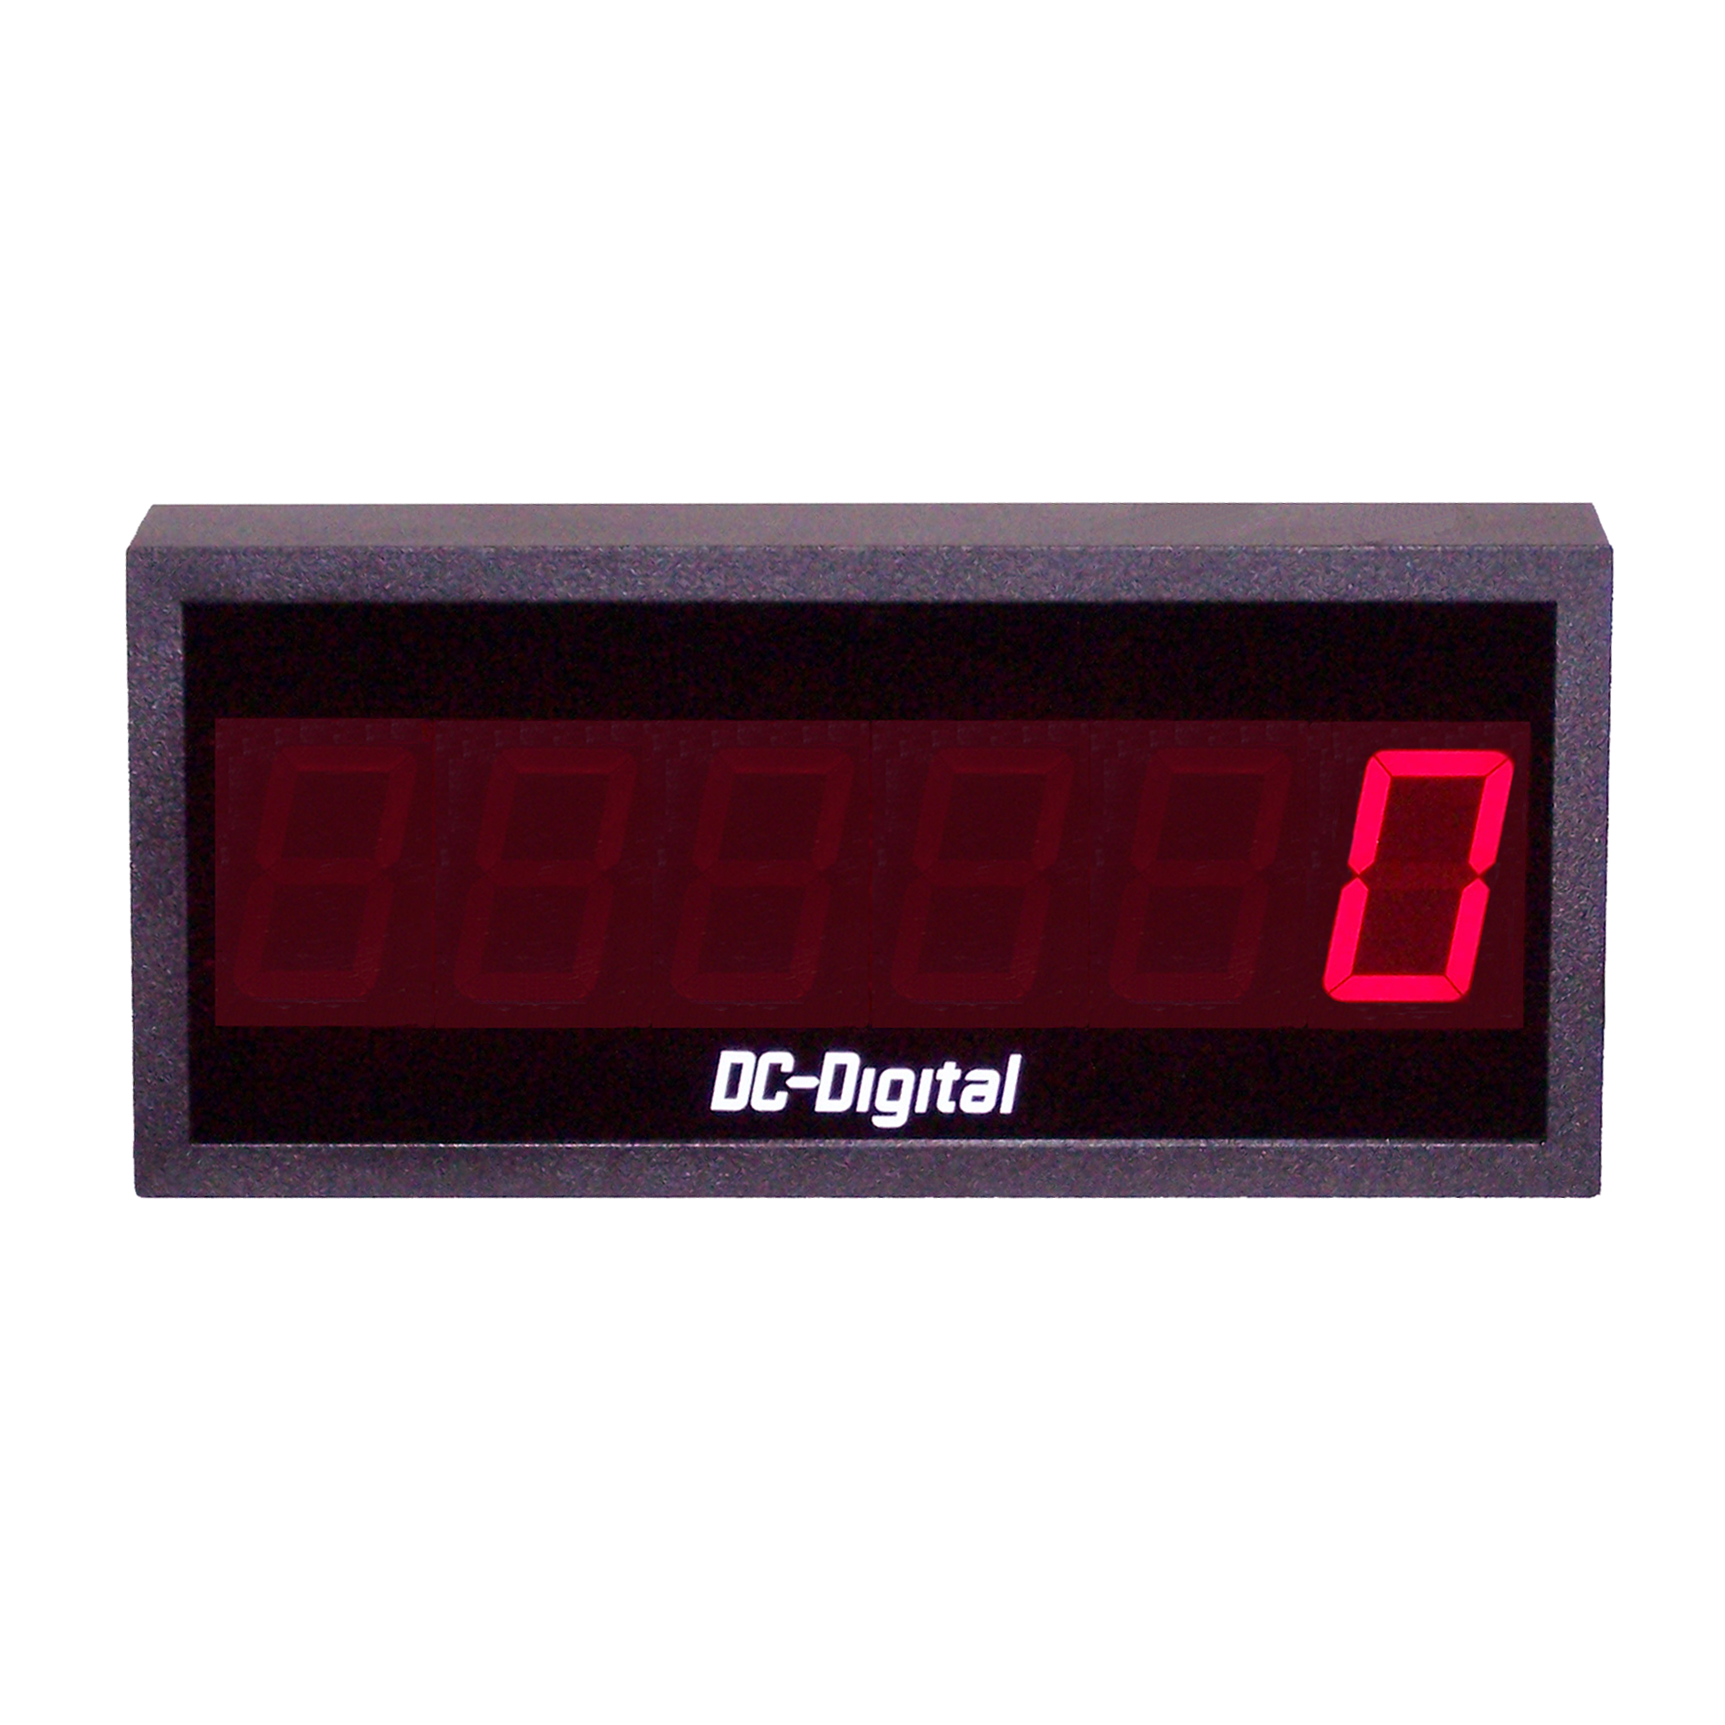 (DC-256C-Term) (6) Digit, 2.3 Inch LED Digital Multi-Input Counter that accepts: PLC, Relay, Switch and Sensor Input Controls